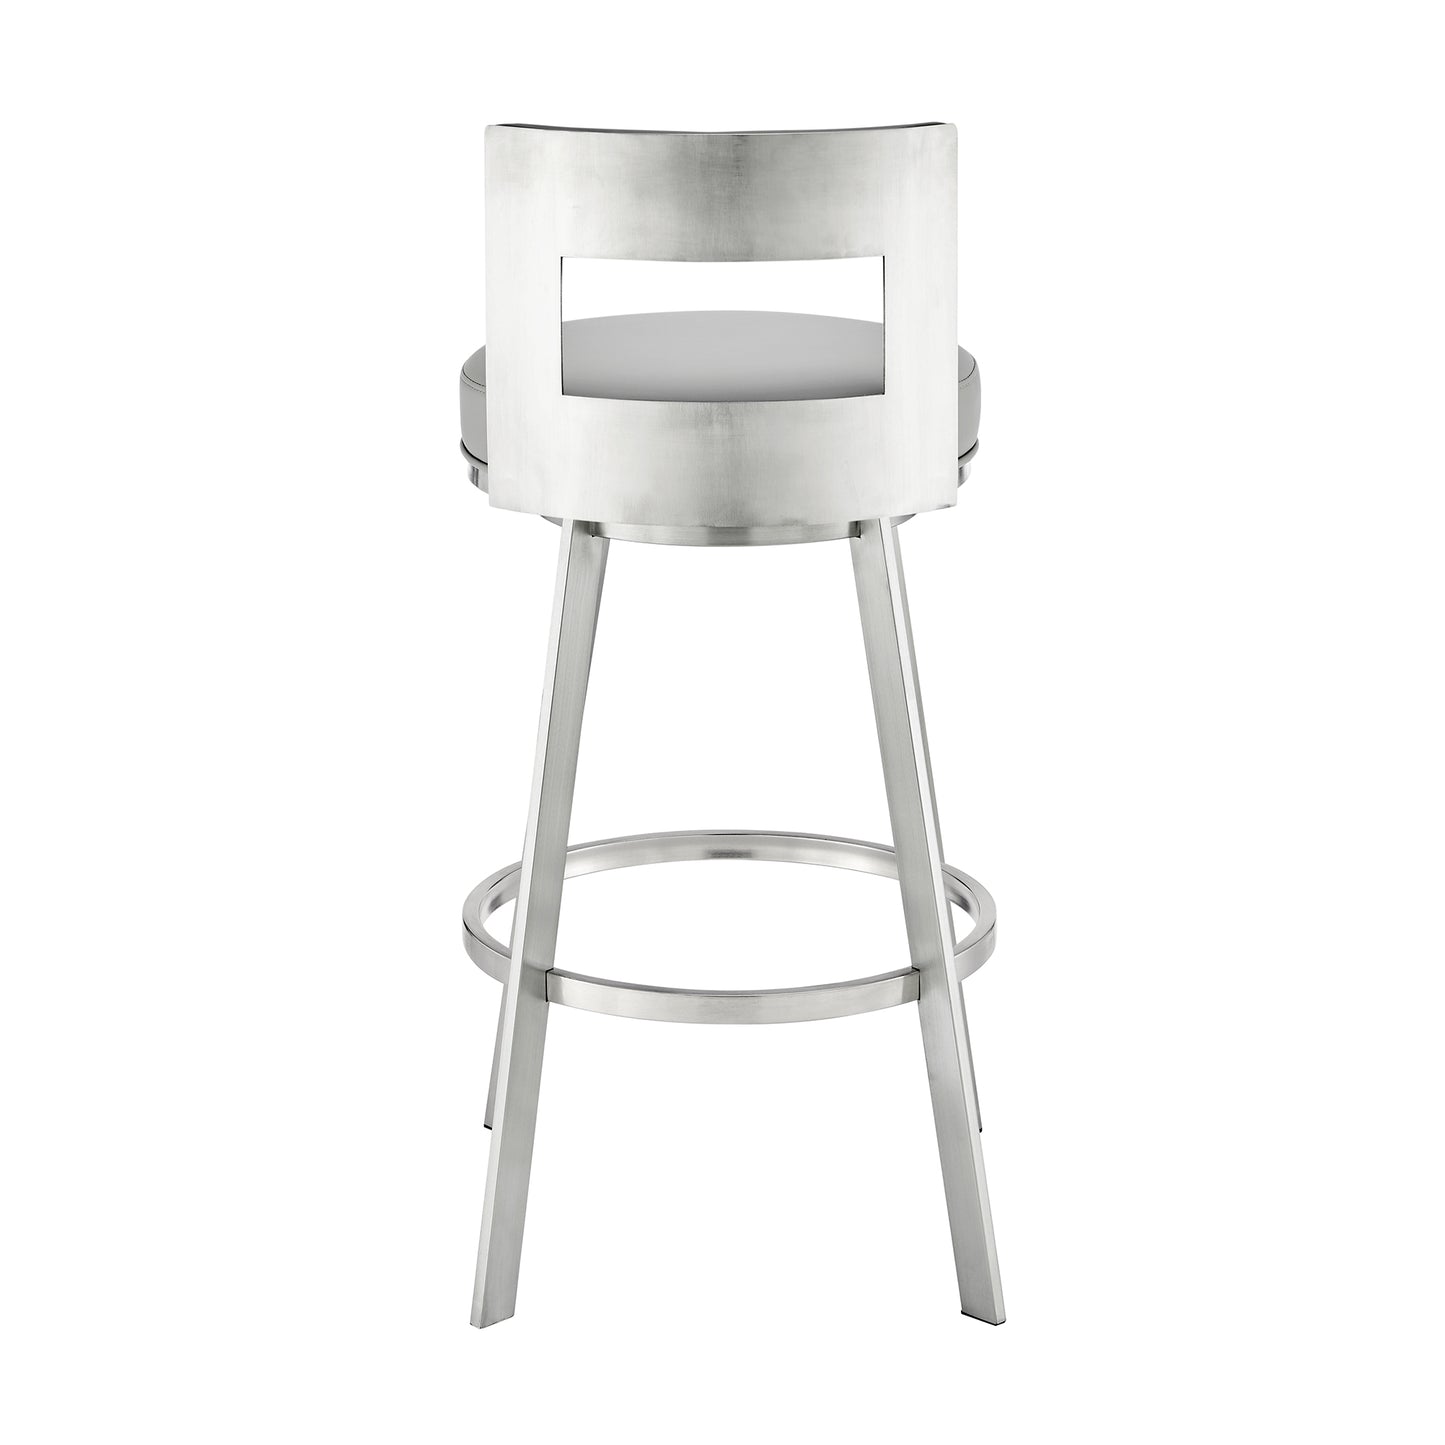 Flynn 30" Swivel Bar Stool in Brushed Stainless Steel with Light Gray Faux Leather